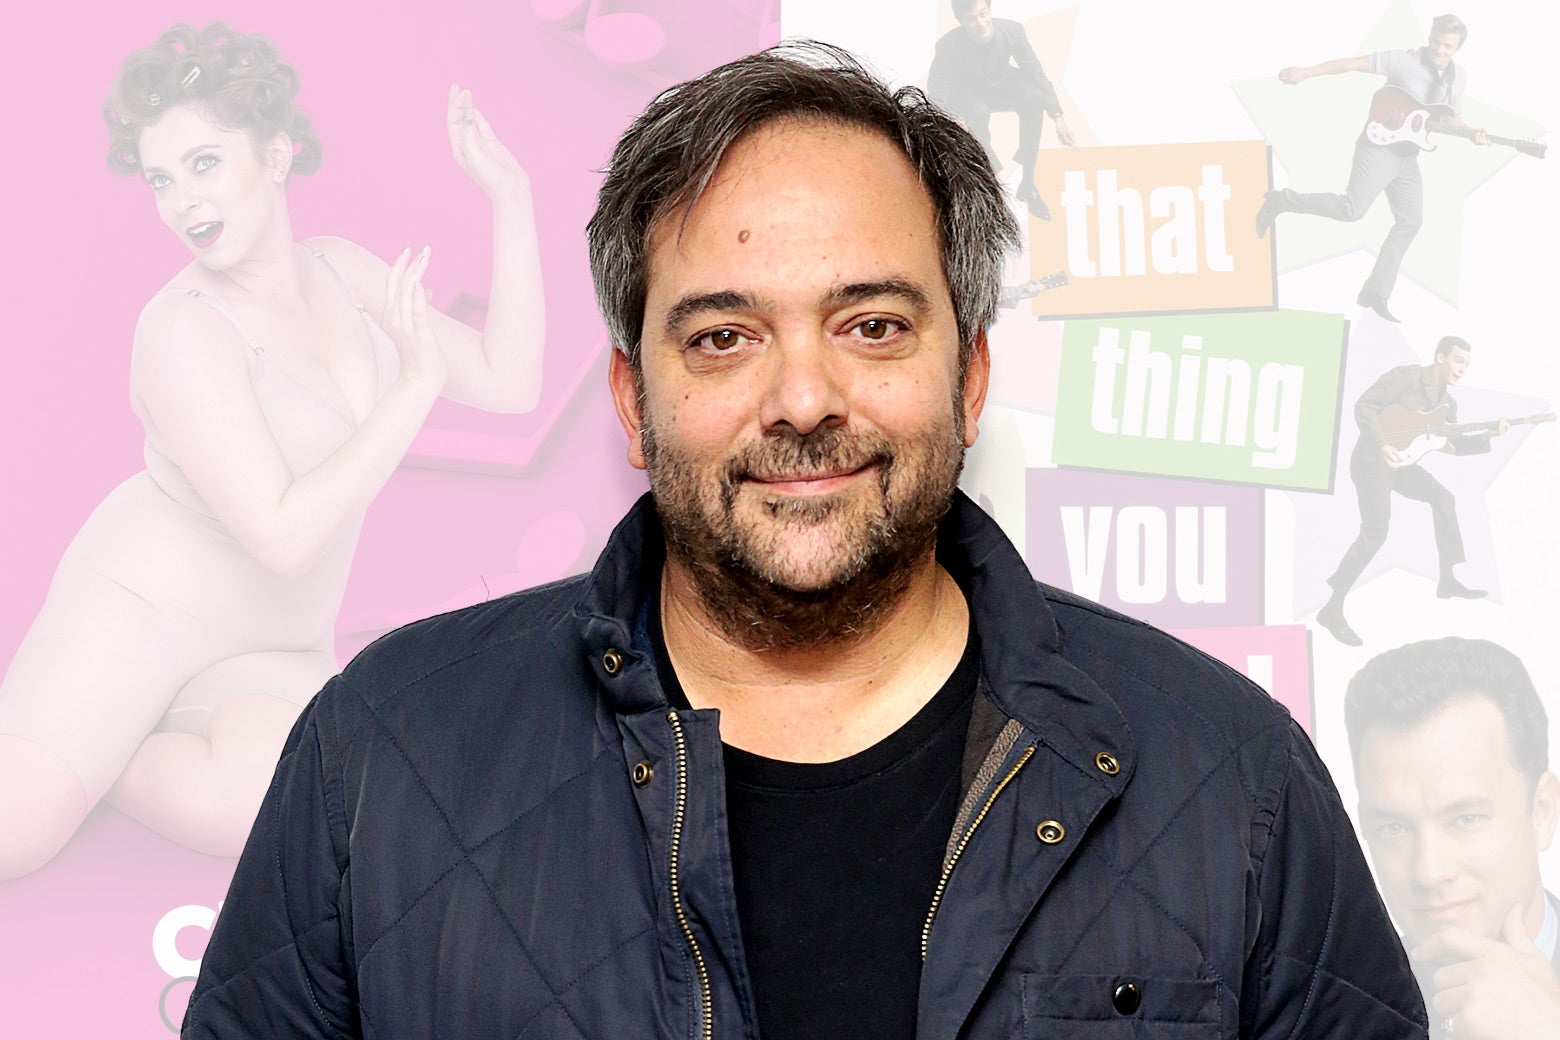 Adam Schlesinger is seen in front of faded posters for Crazy Ex-Girlfriend and That Thing You Do!